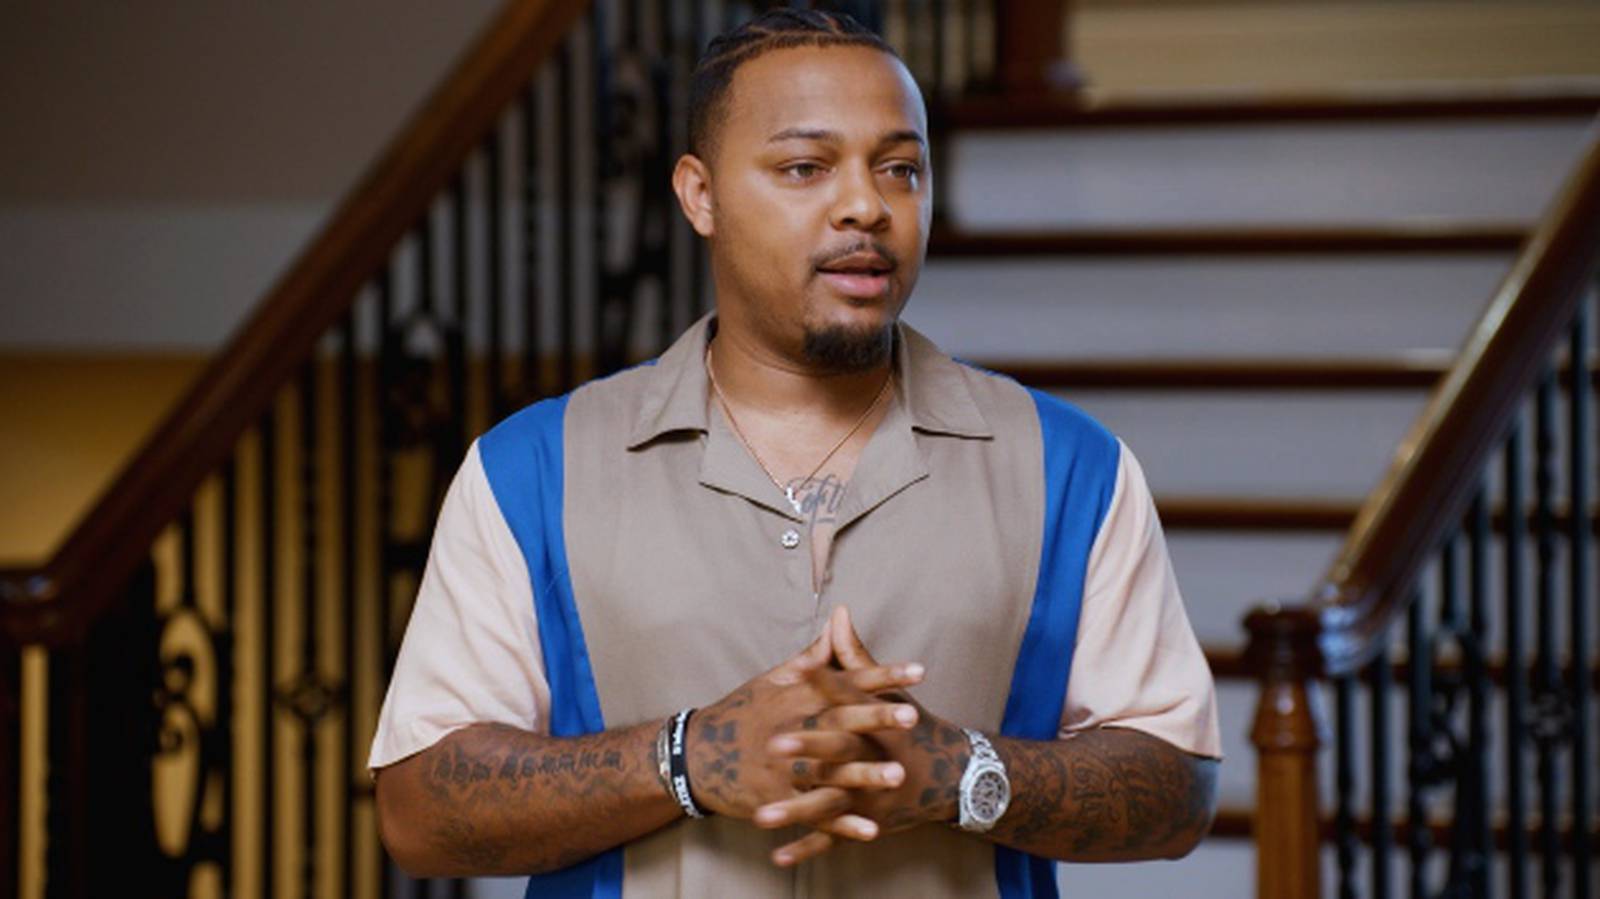 Bow Wow responds to criticism of his music legacy "The proof is in the